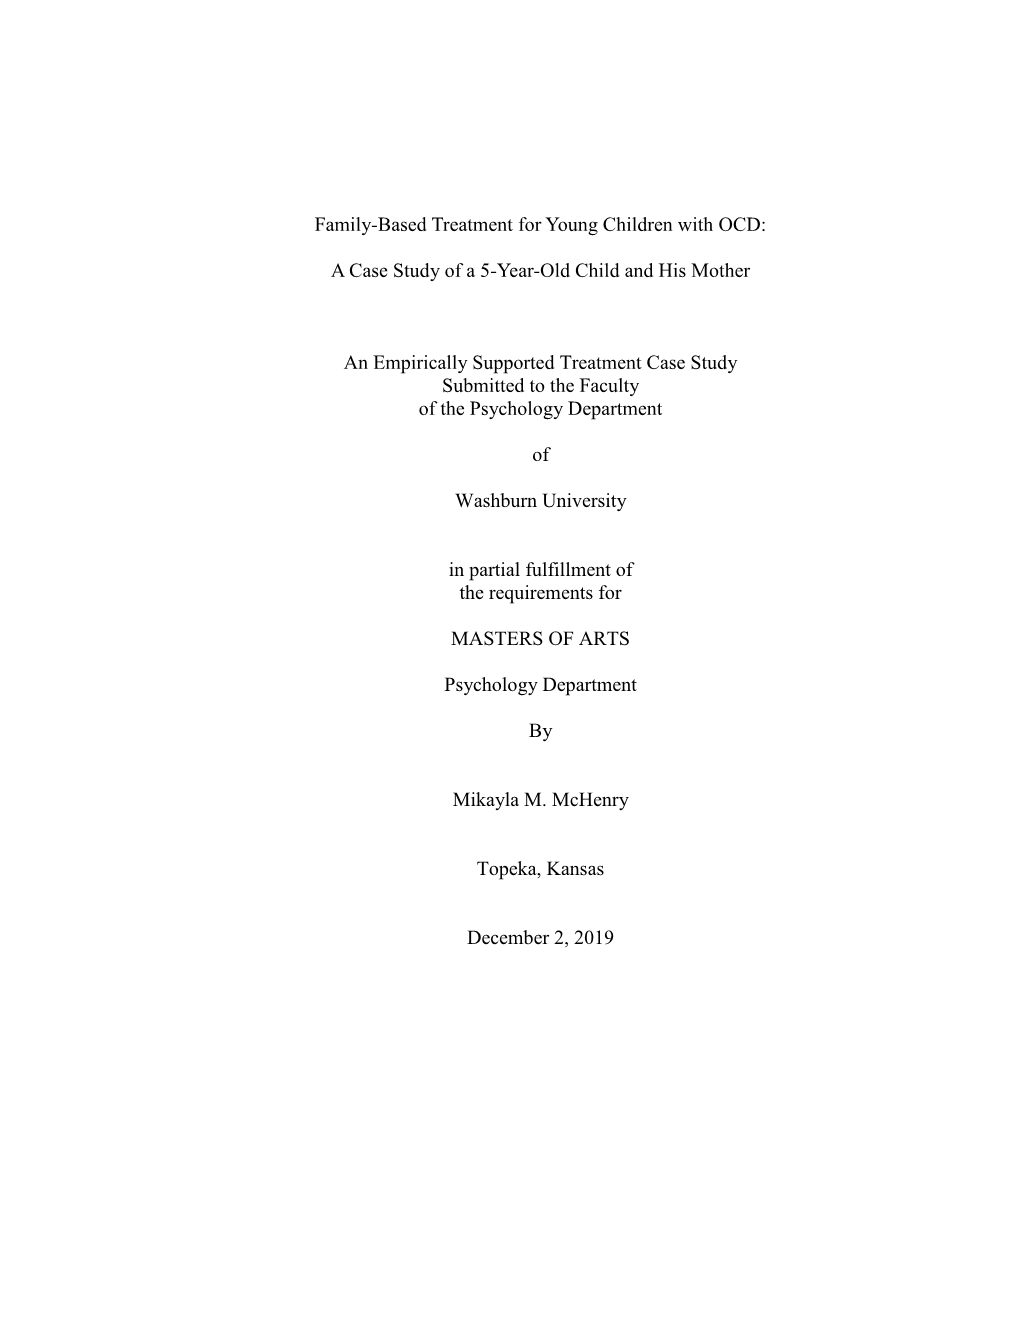 Family-Based Treatment for Young Children with OCD: a Case Study Of